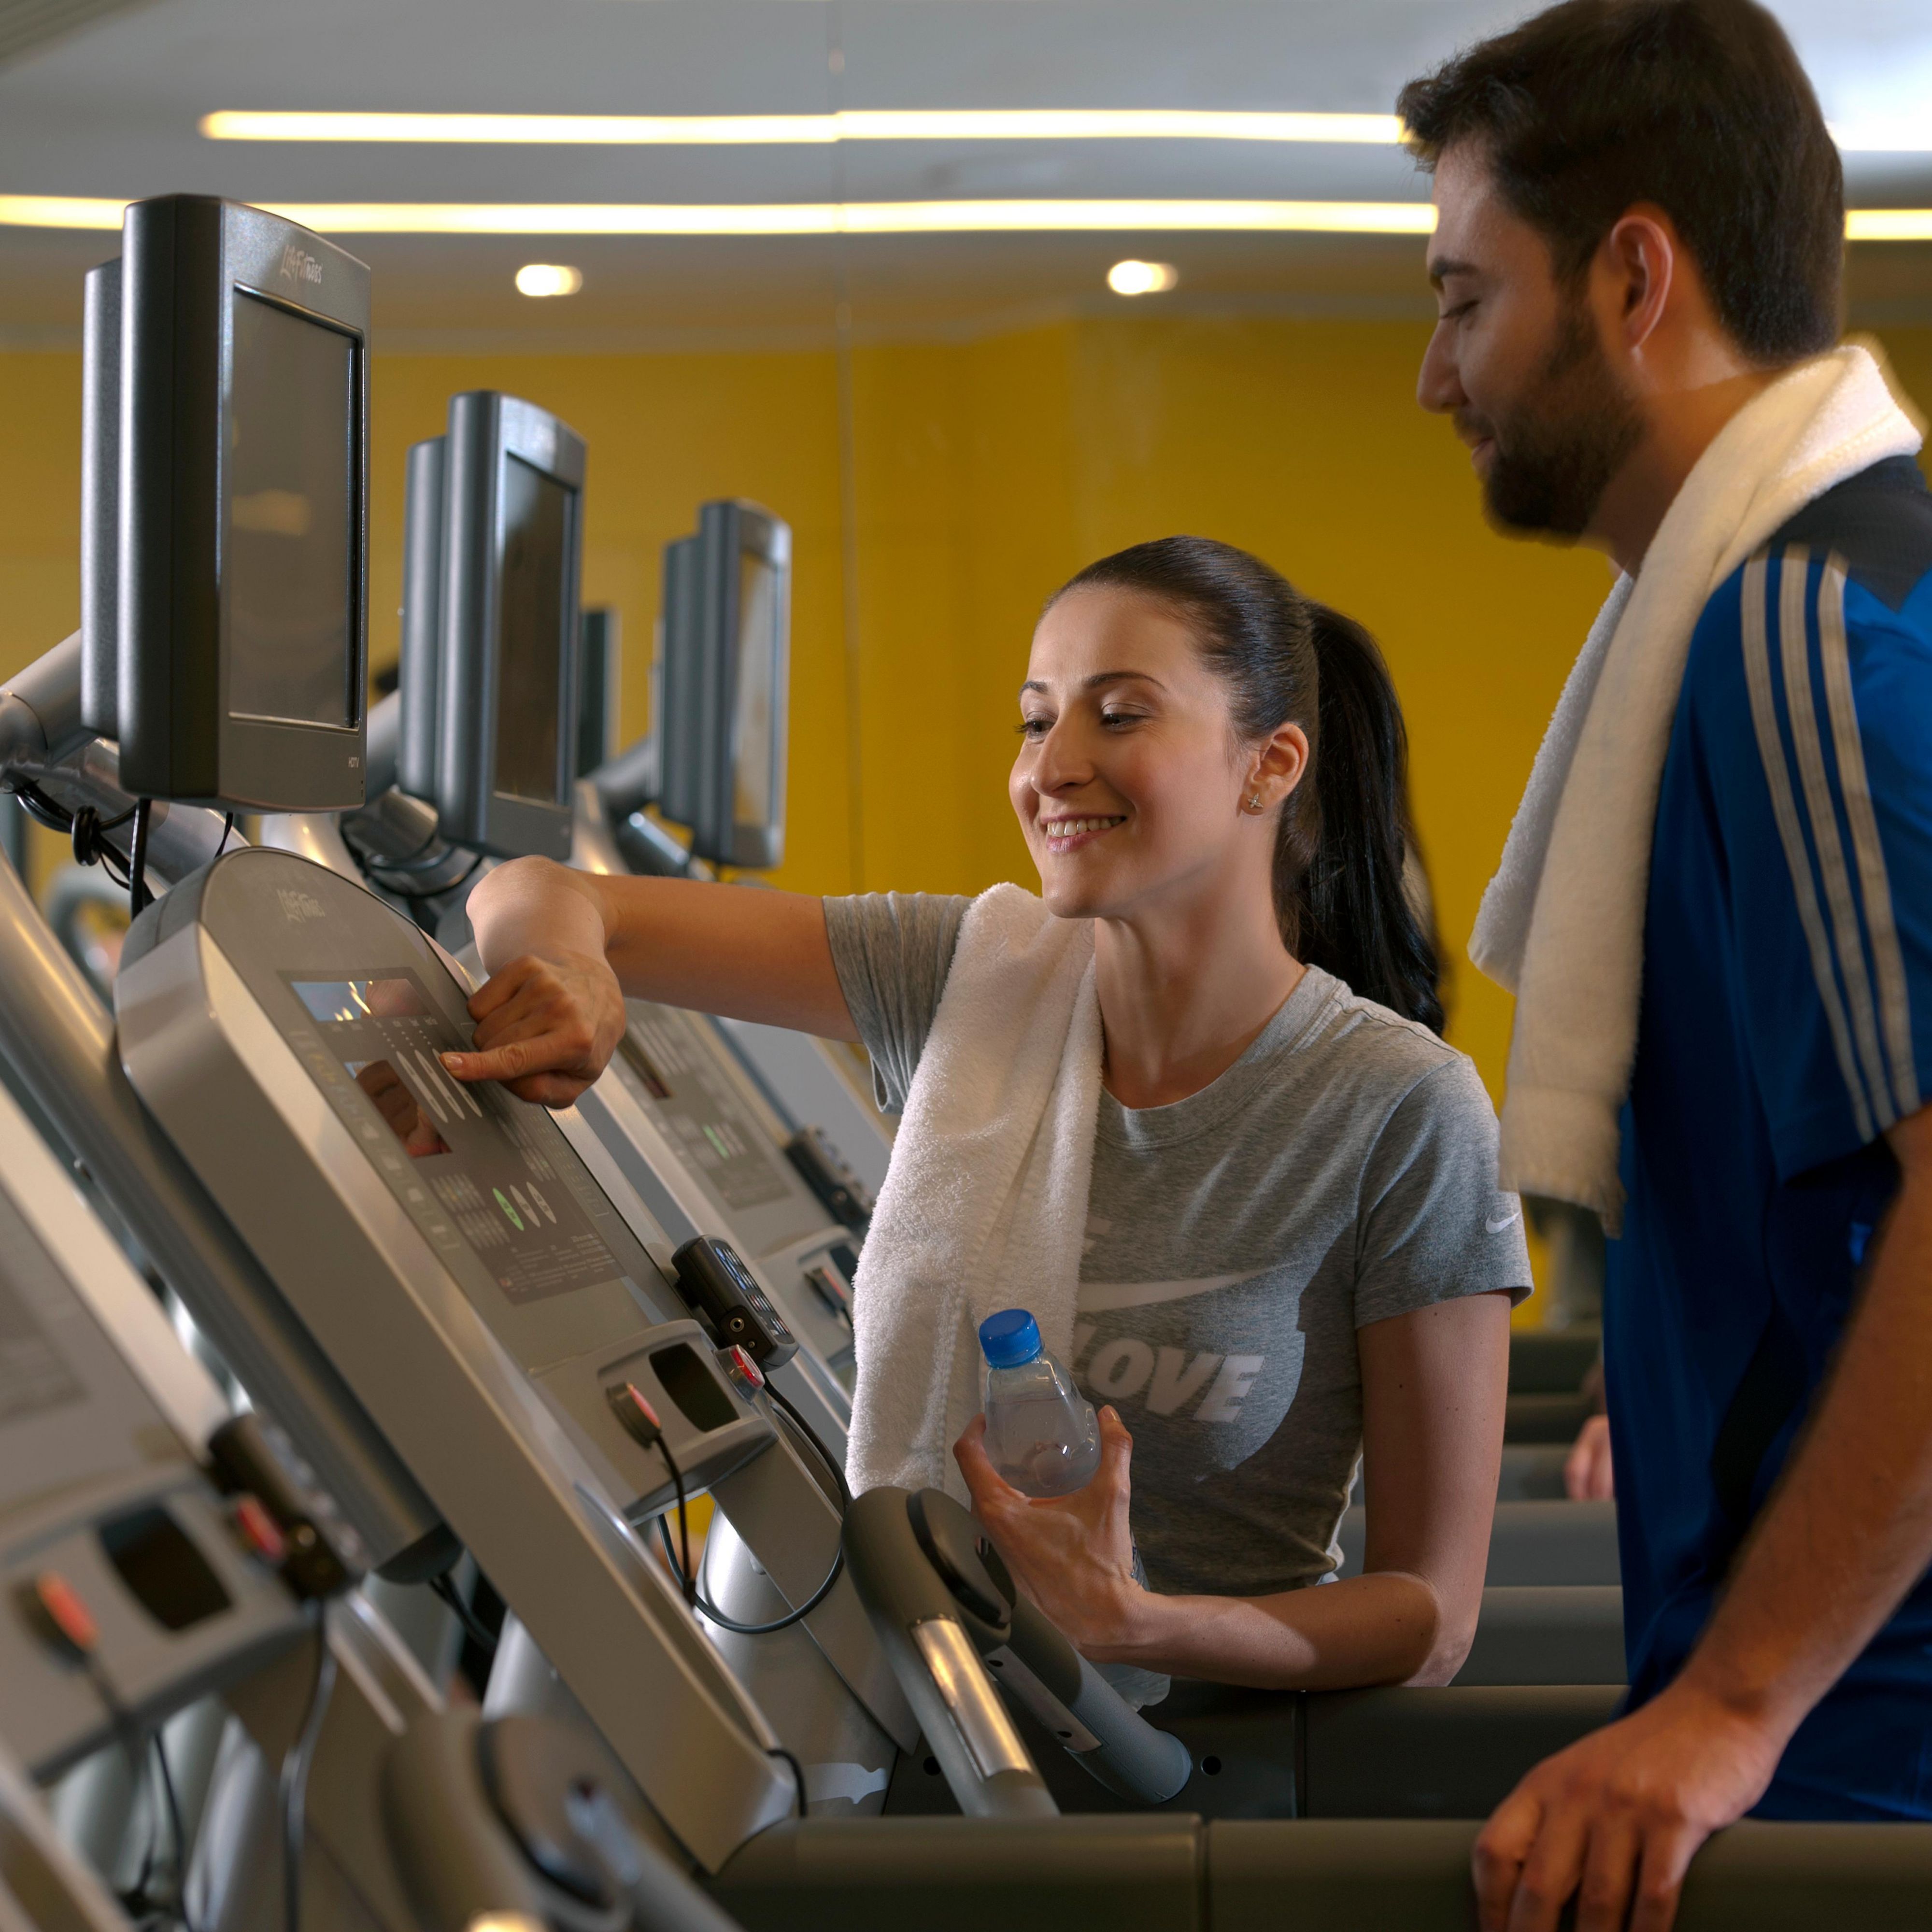 Get a good workout at our 24-hour Fitness Club